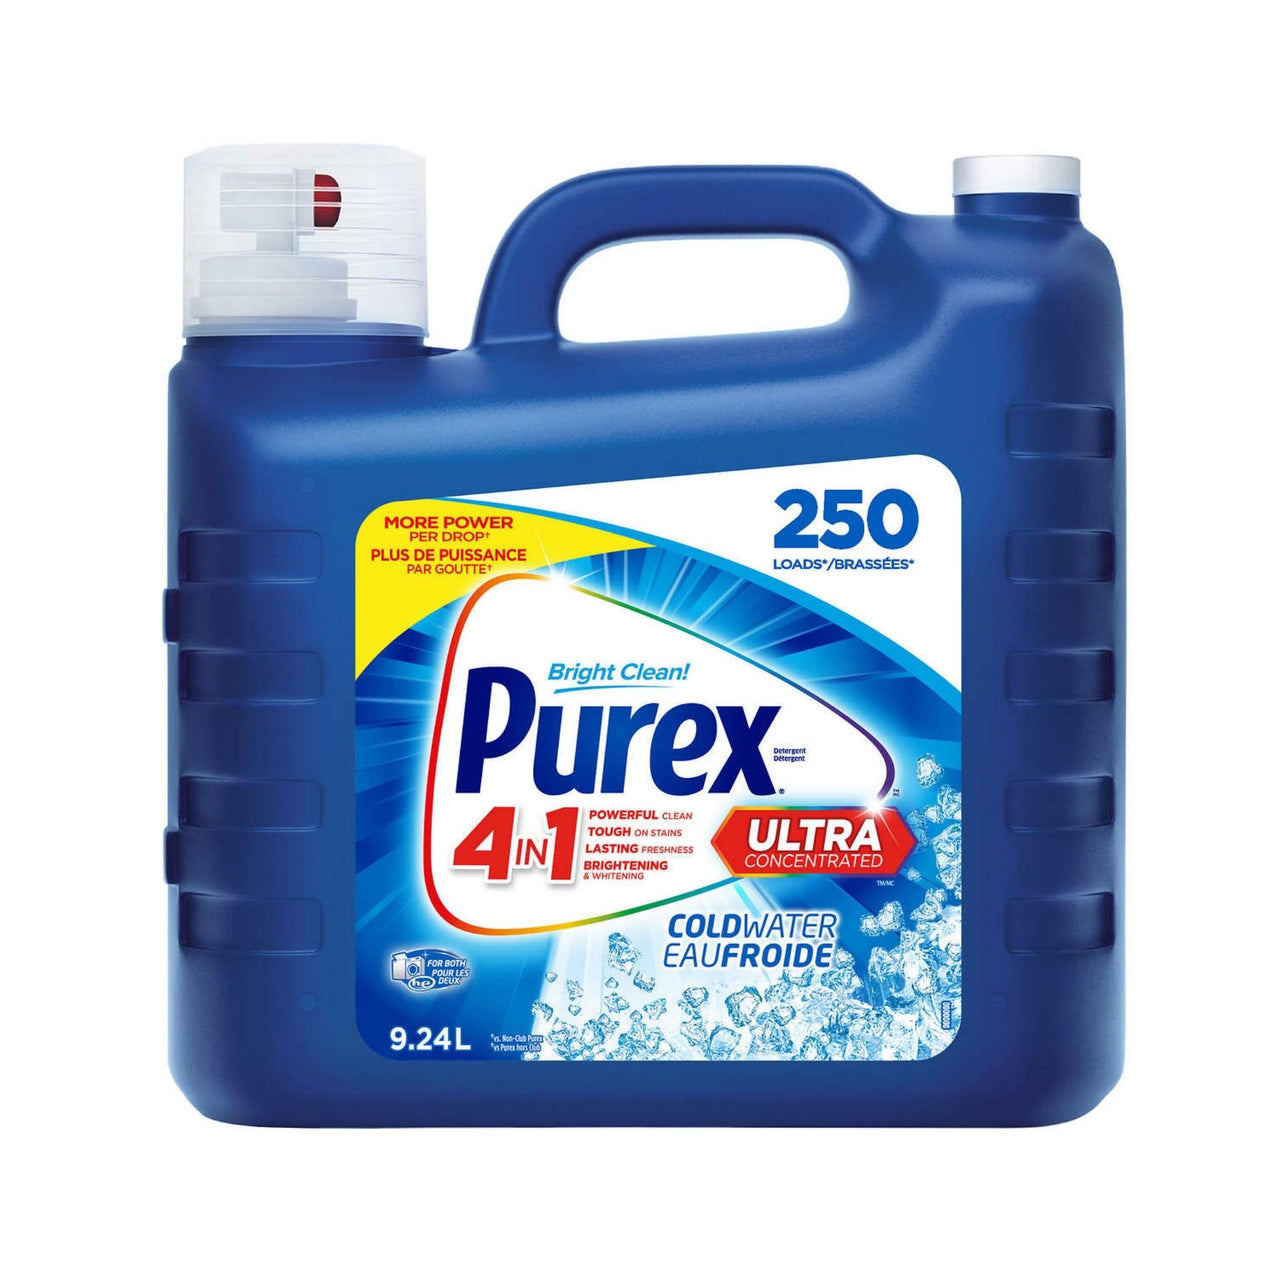 Image of Purex Cold Water Ultra Concentrated Laundry Detergent, 250 Wash Loads